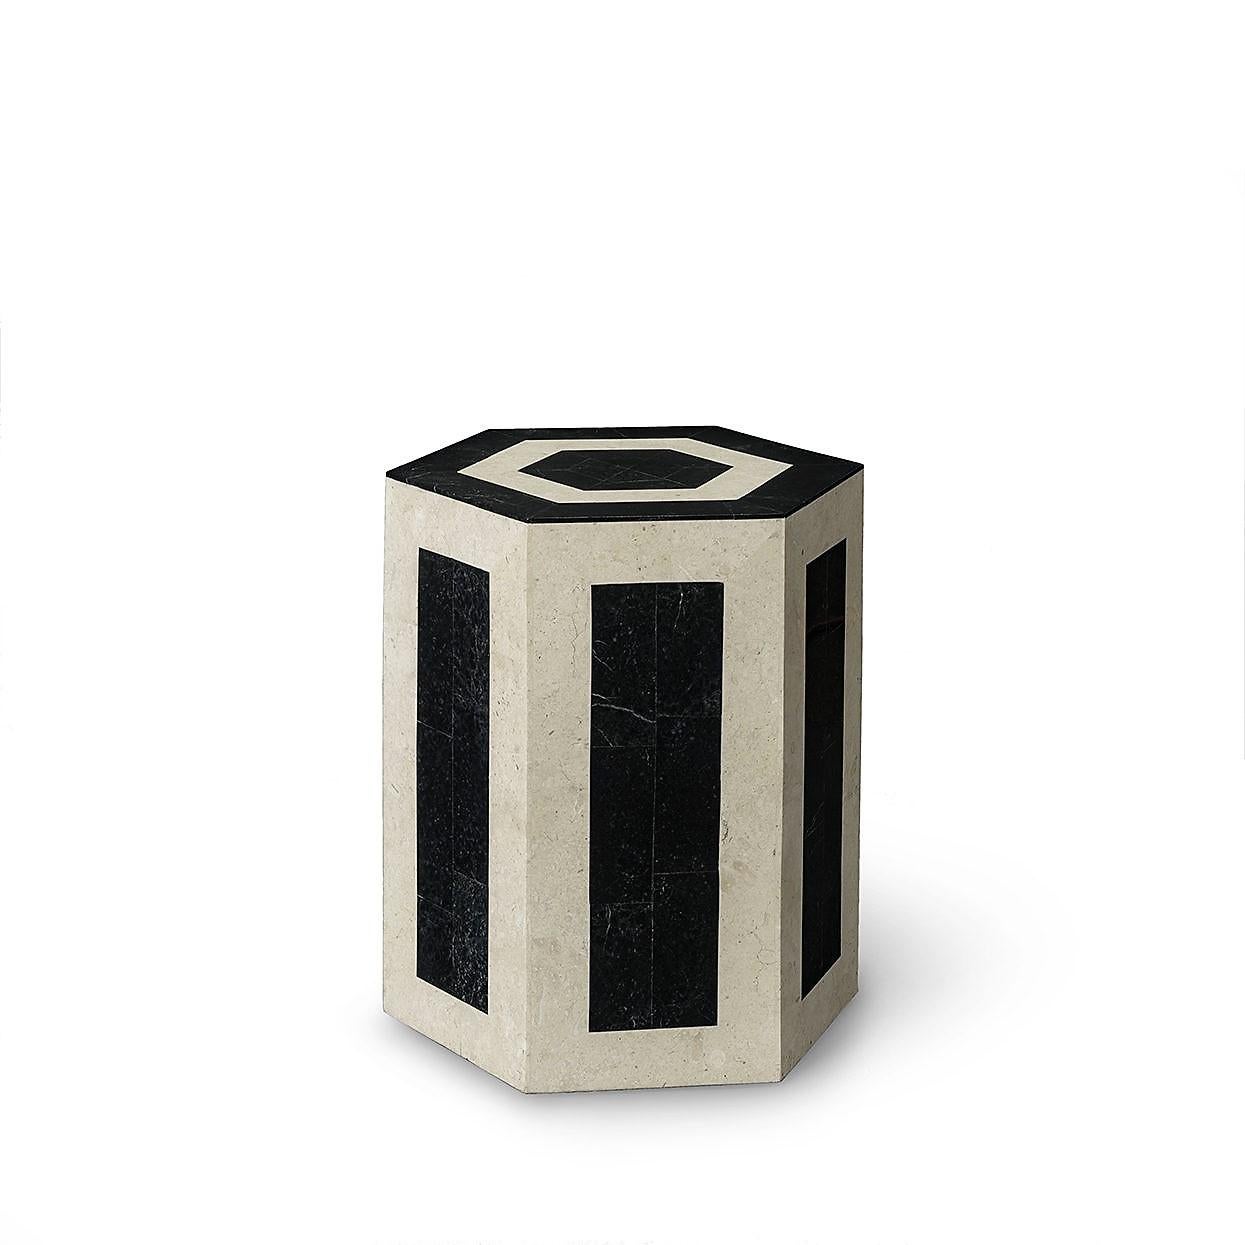 Each side table is hand-cut in black and cream natural stone and features the same pattern in opposite colors. The geometric pattern is hand-cut and inlaid over a fiberglass frame. 

The stone is a natural material and may slightly vary by color or